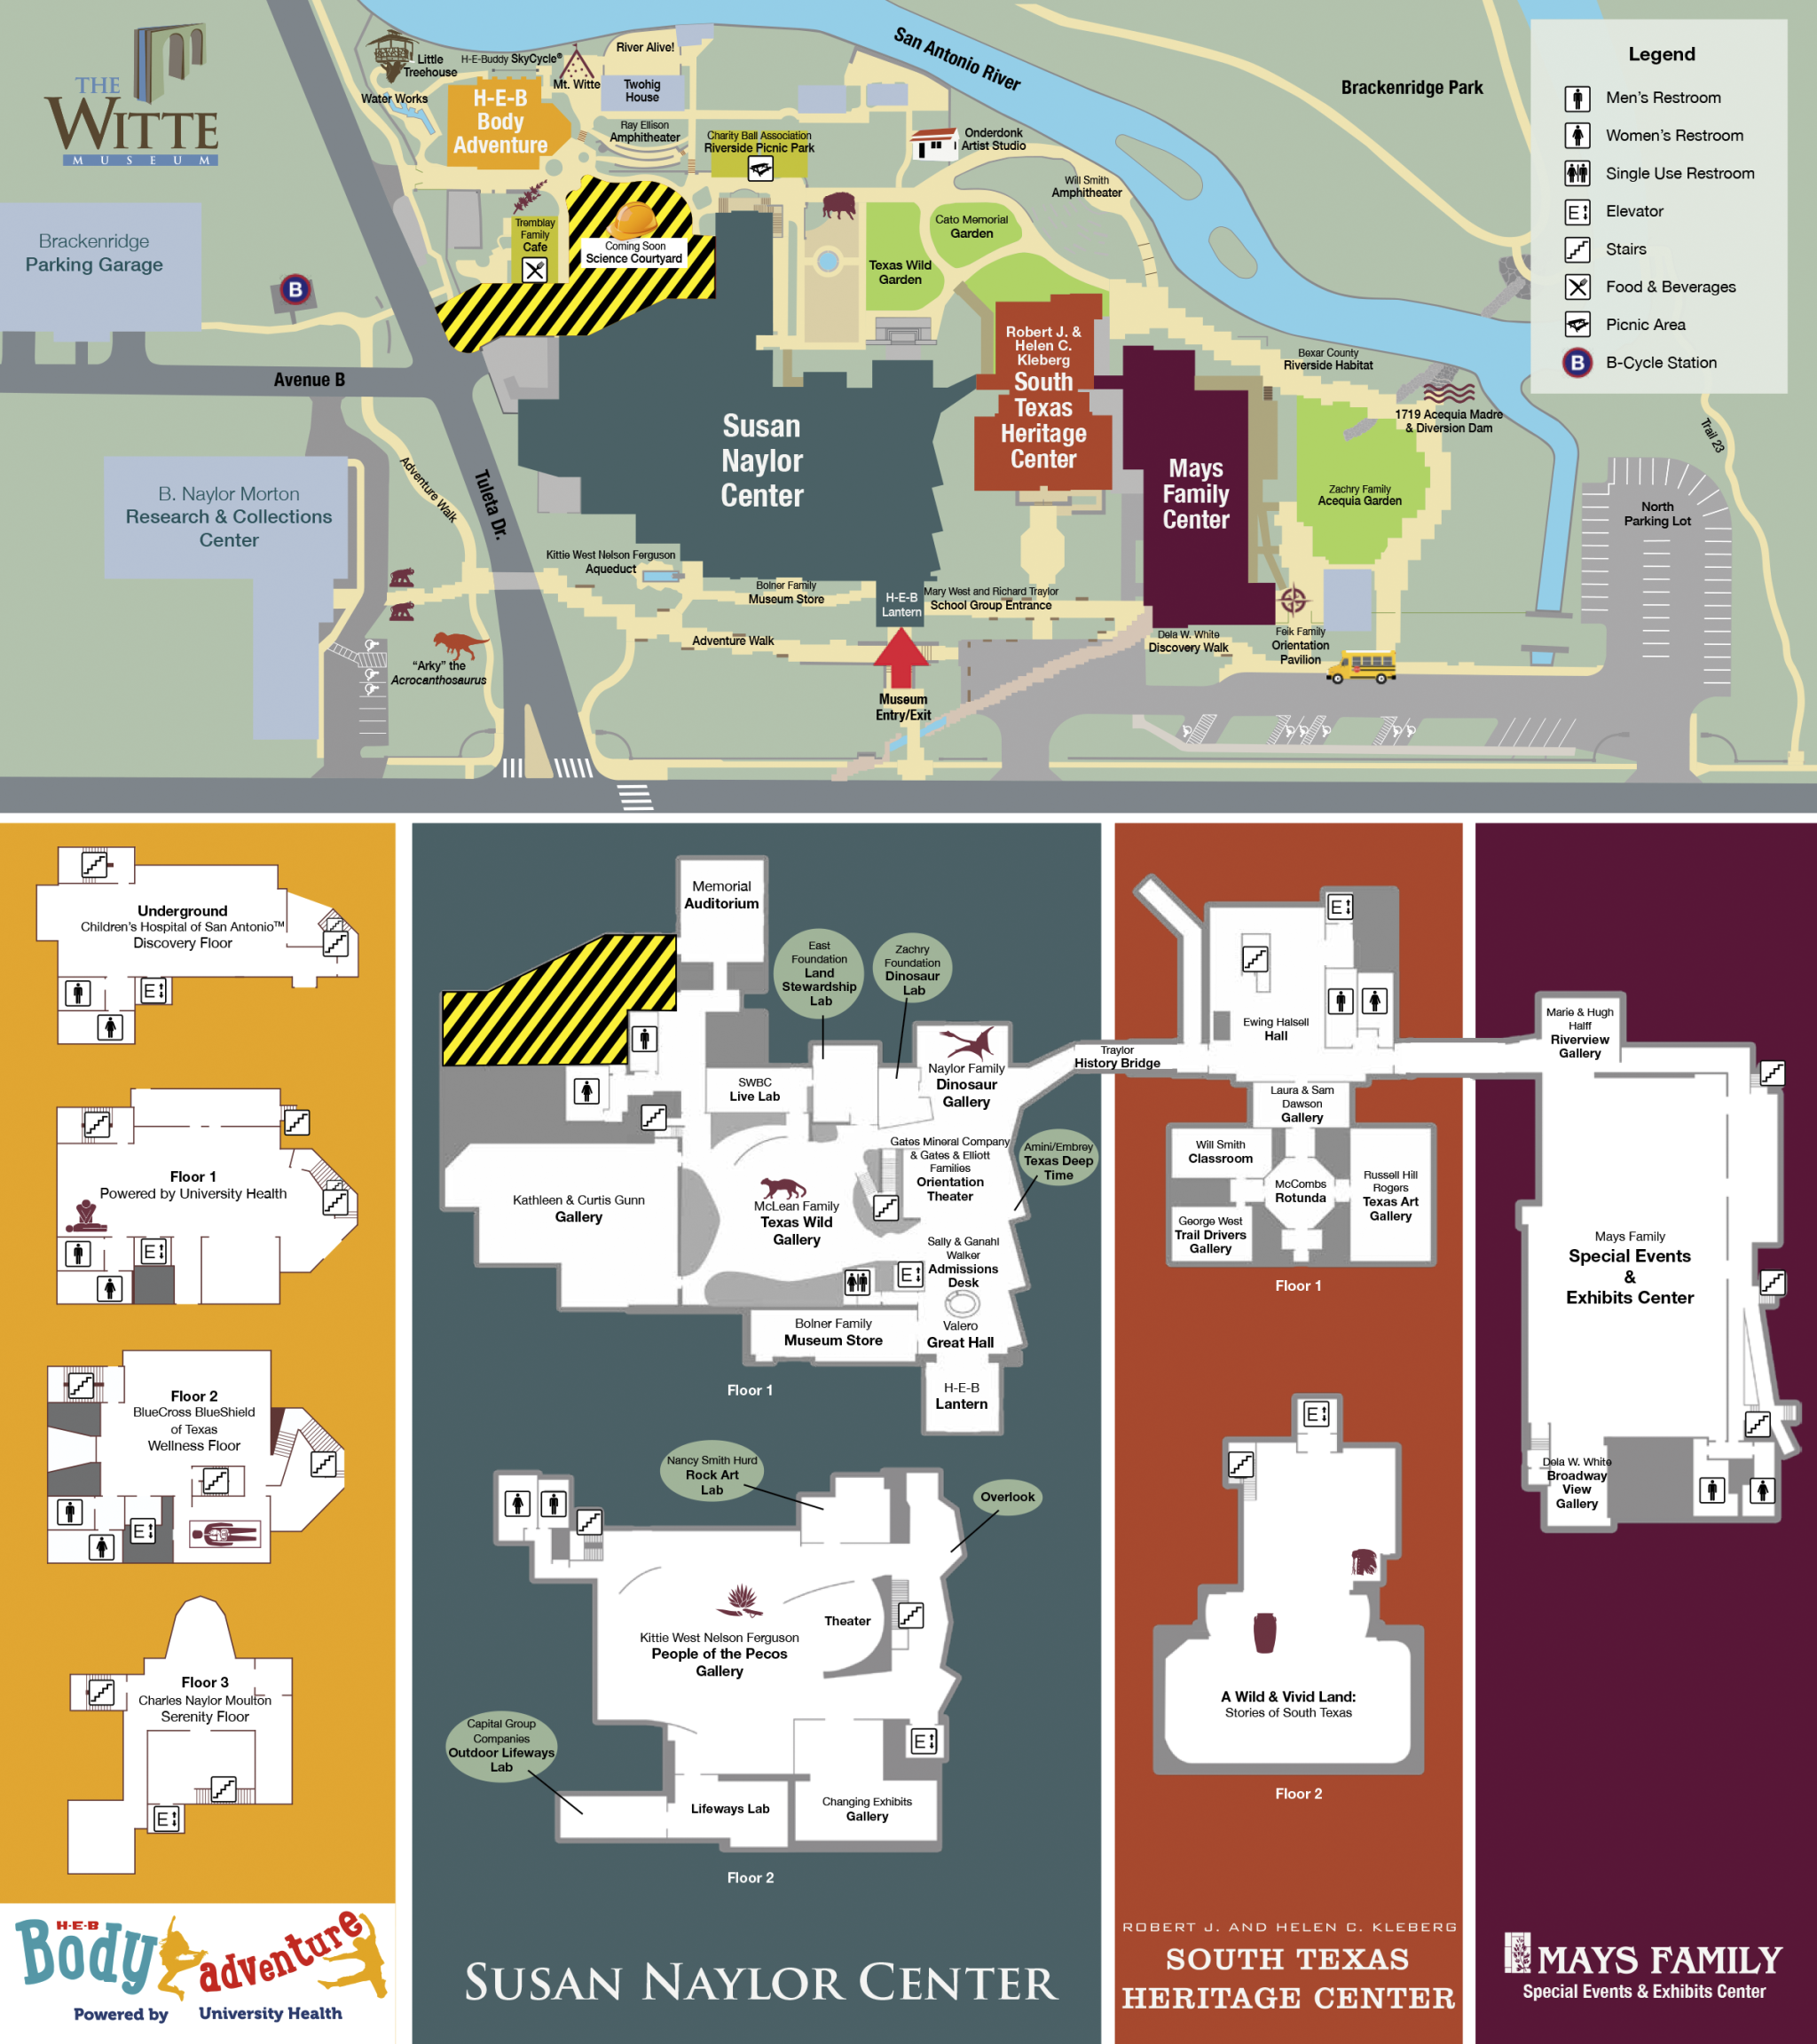 Witte Museum visitor guide map